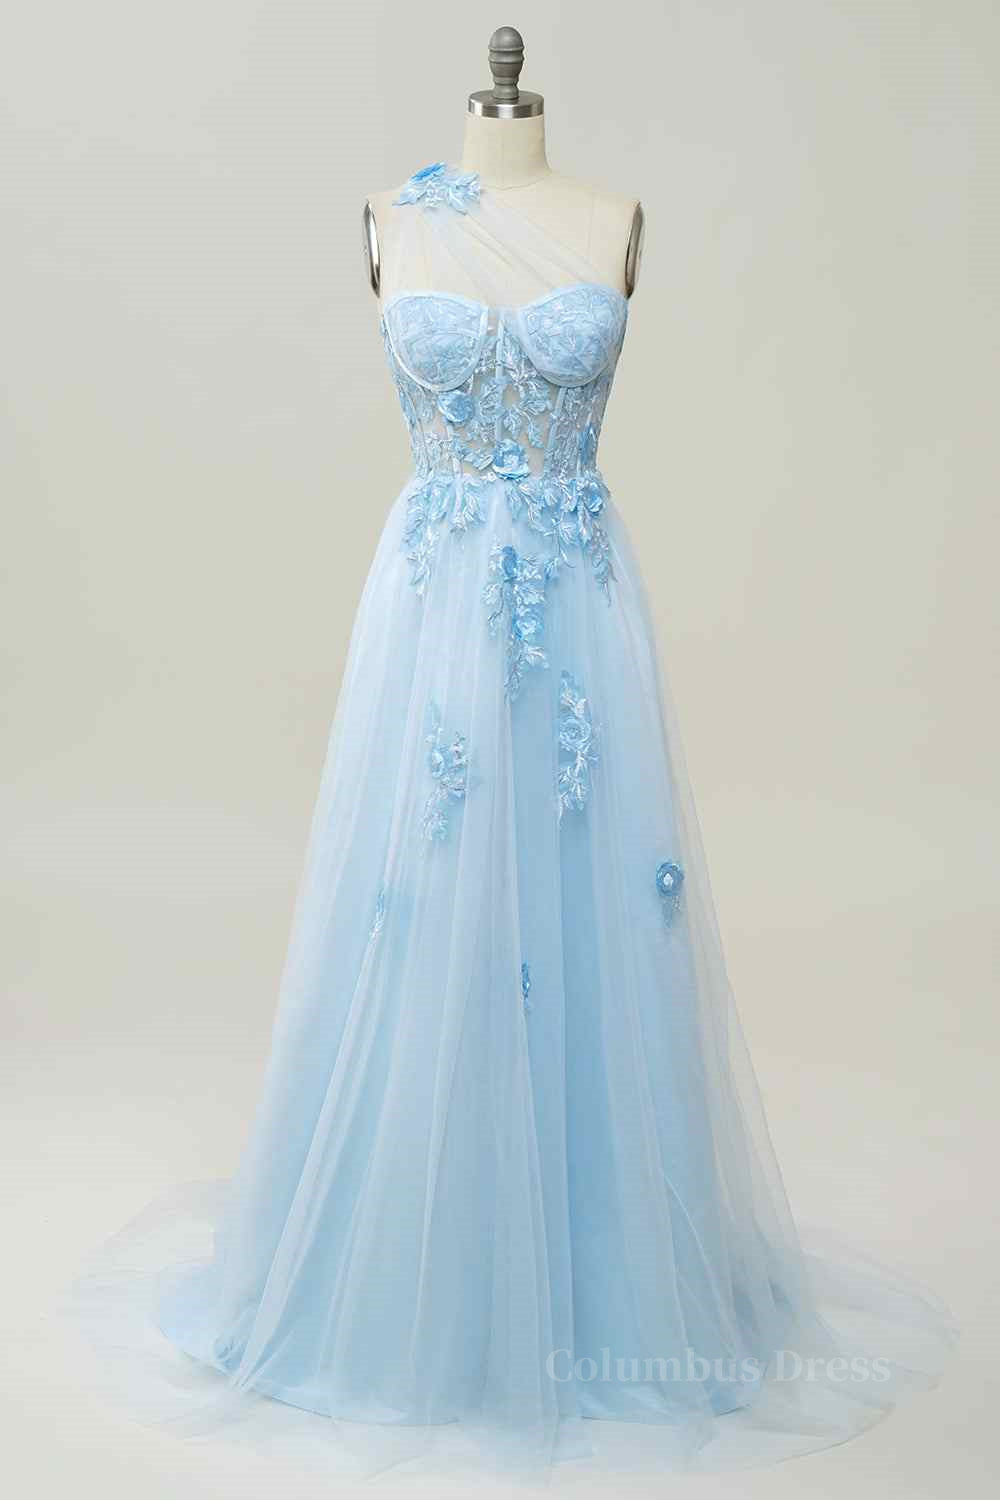 Party Dressed Short, A-line Strapless Tulle Applique Long Prom Dress